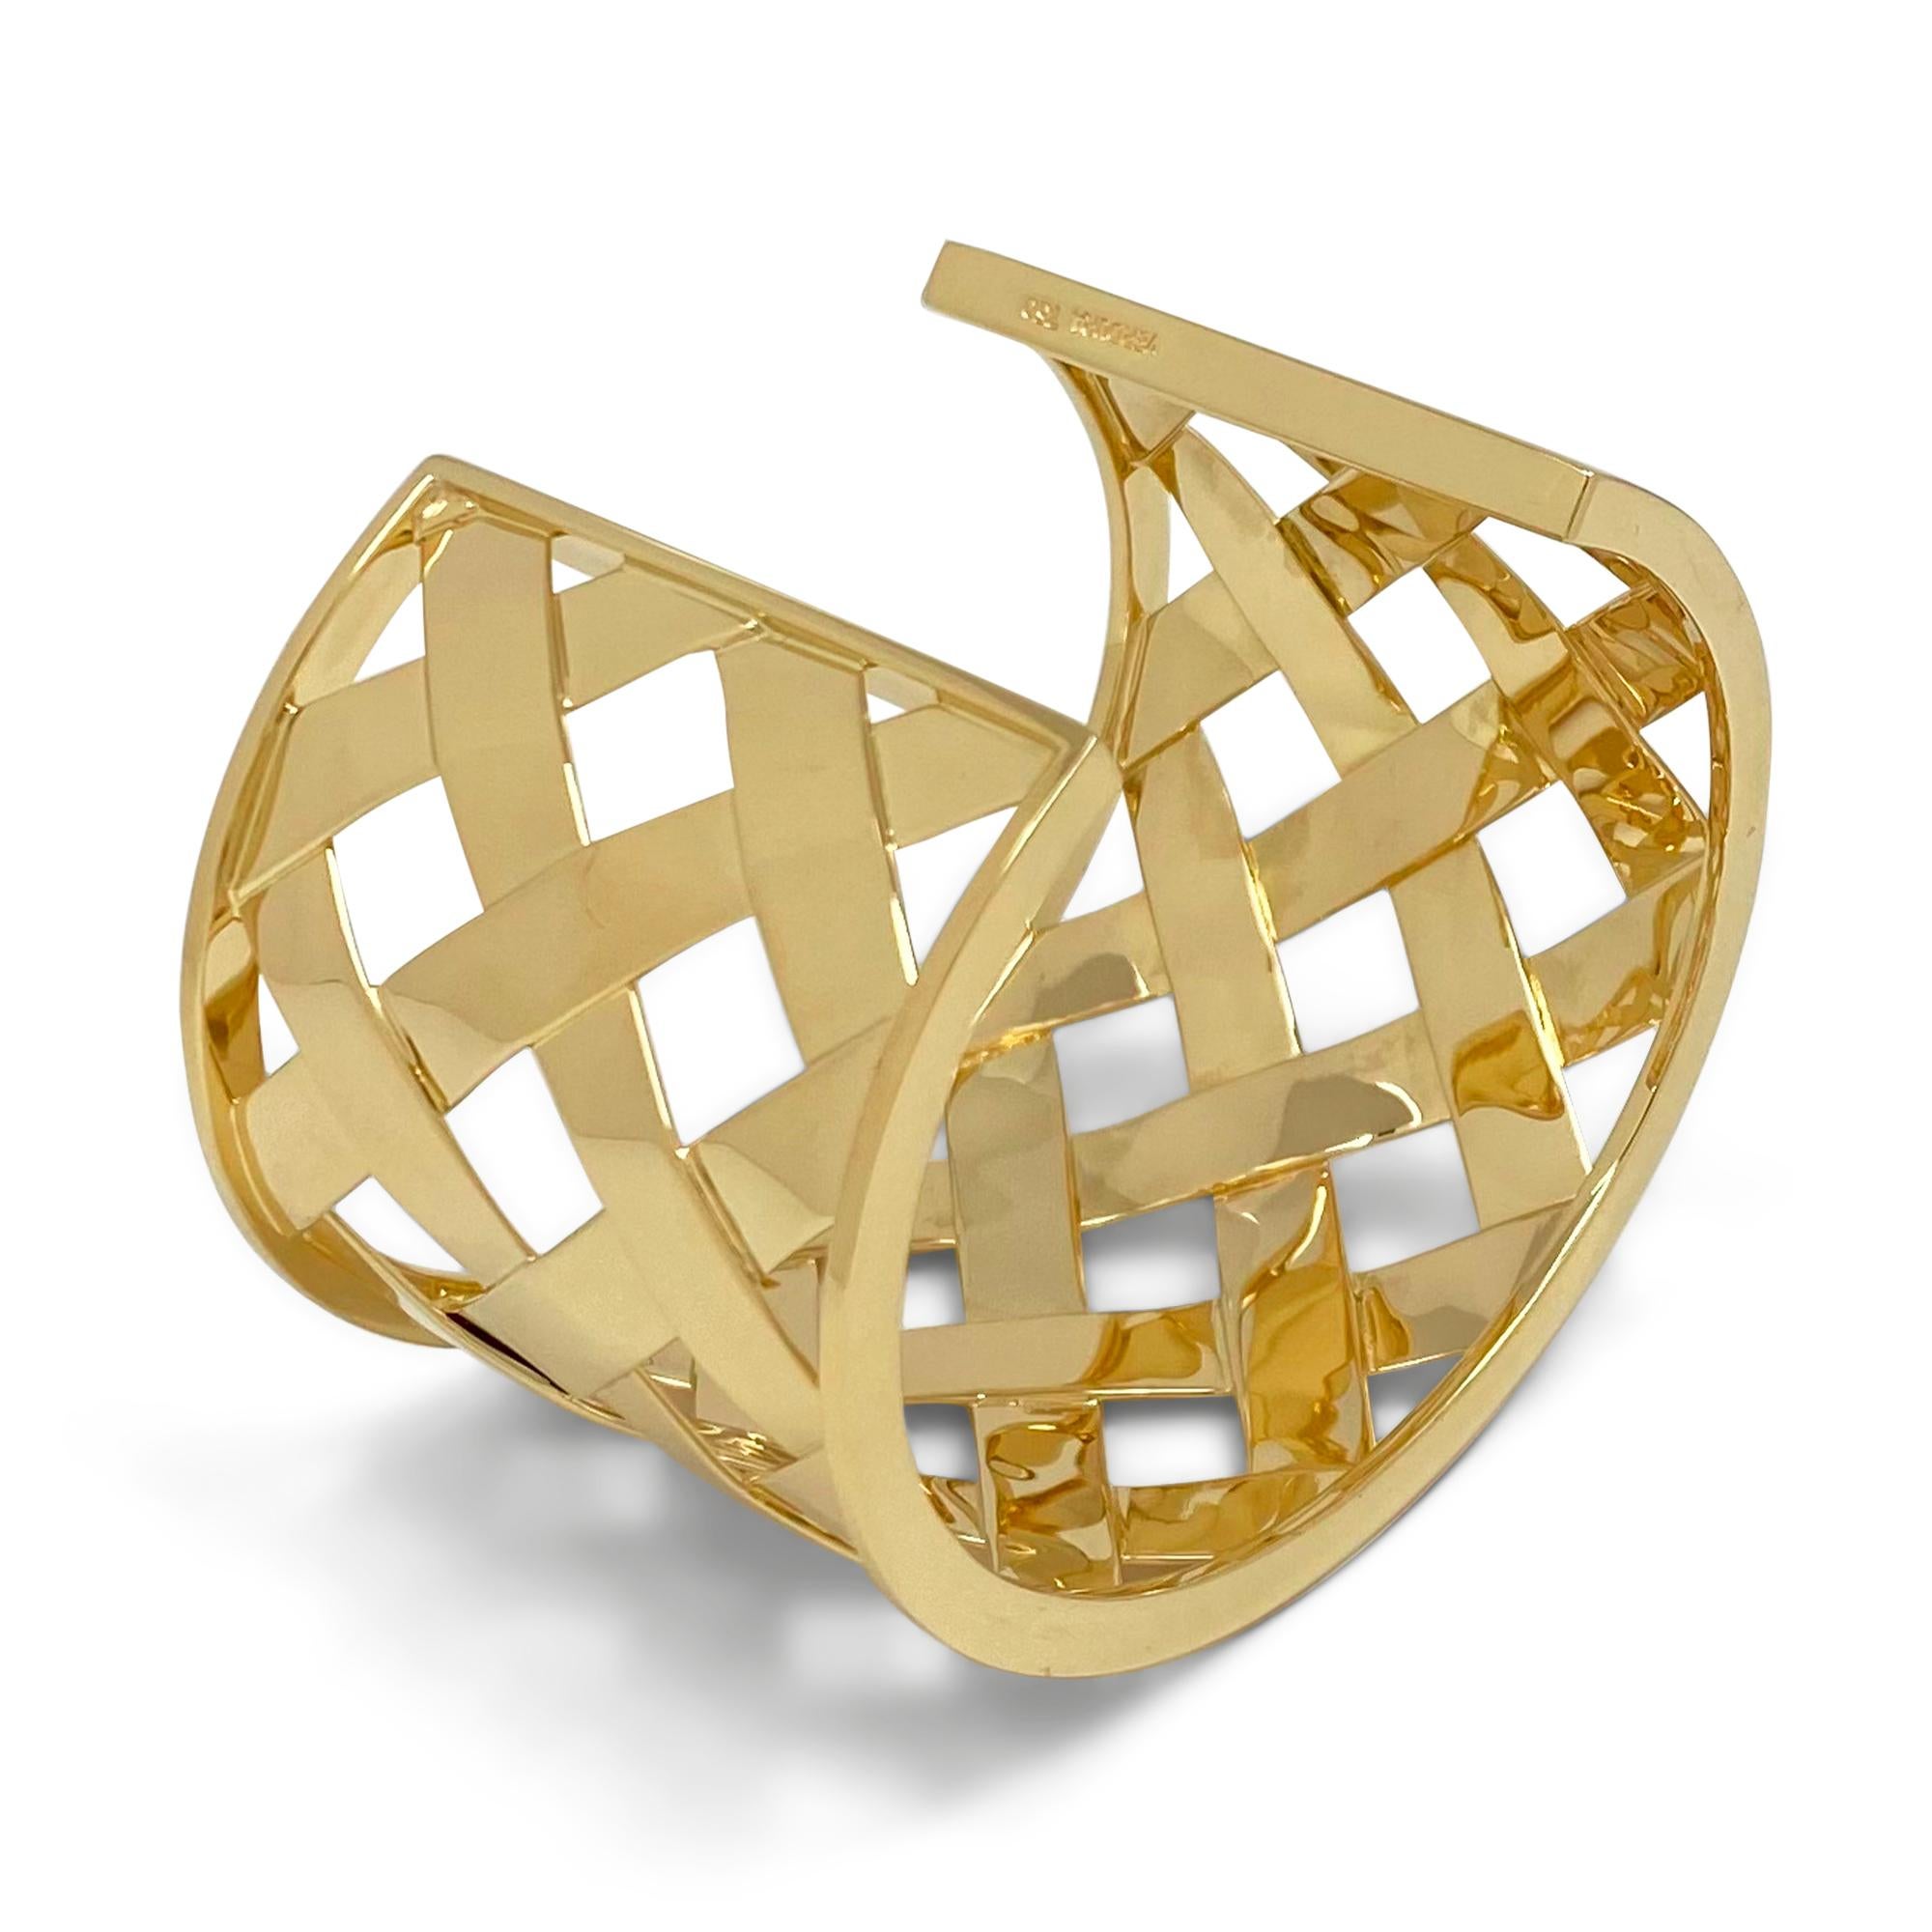 Authentic Verdura 'Criss Cross' cuff bangle crafted in 18 karat yellow gold. The open cuff design will fit up to a 6 1/4-inch wrist. Signed Verdura, 750. Not presented with original box or papers. CIRCA 2000s.

Brand: Verdura
Collection: Criss